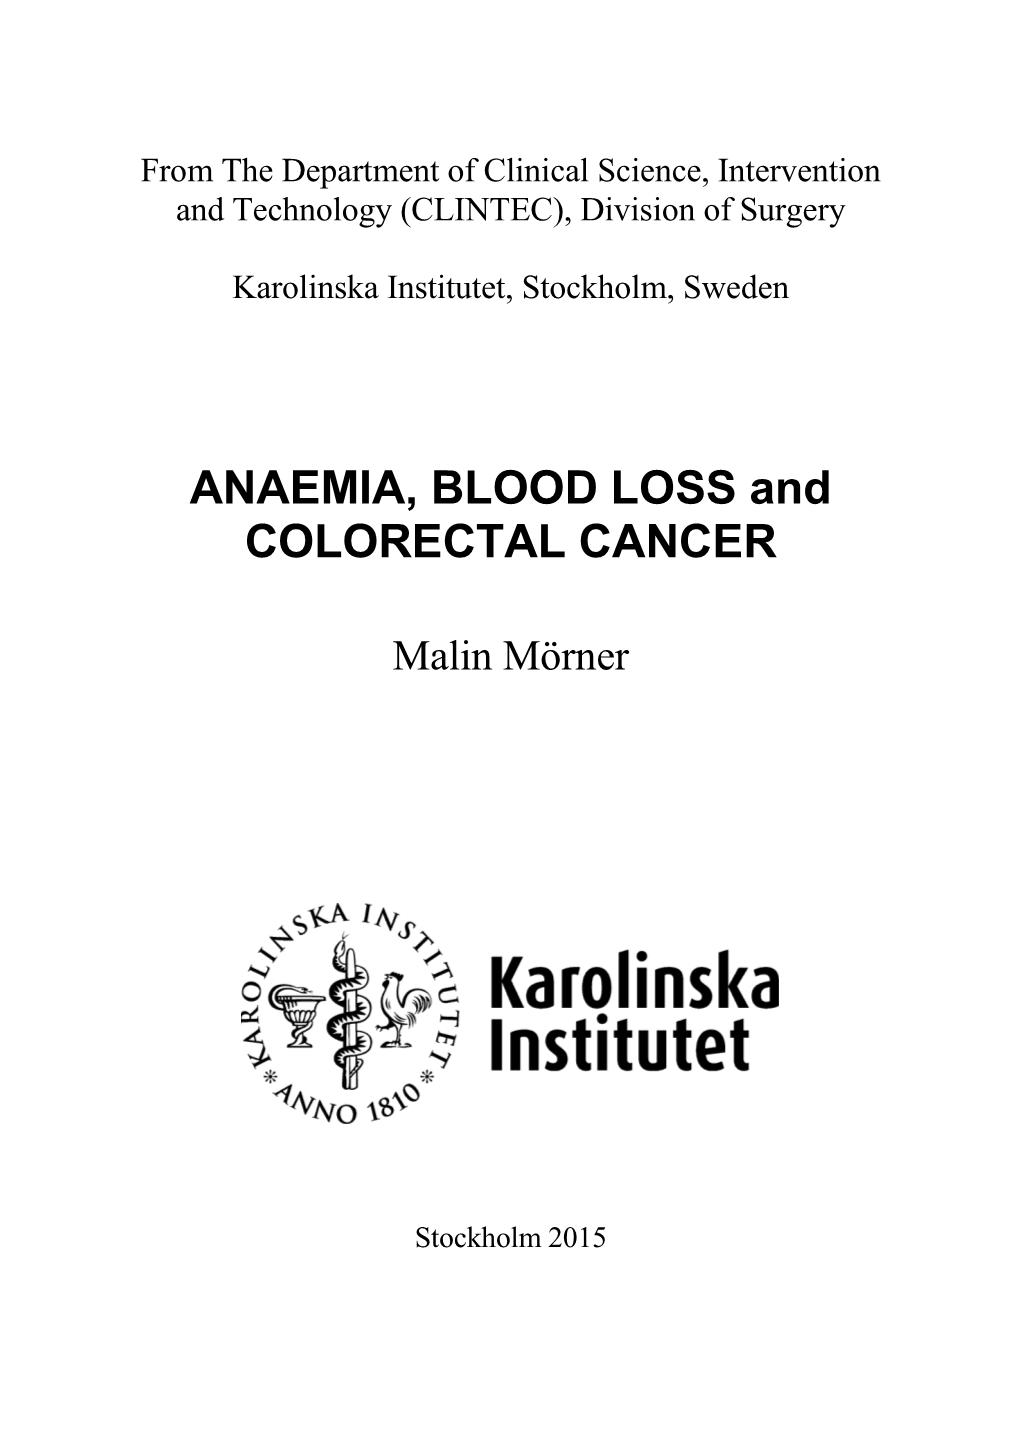 ANAEMIA, BLOOD LOSS and COLORECTAL CANCER